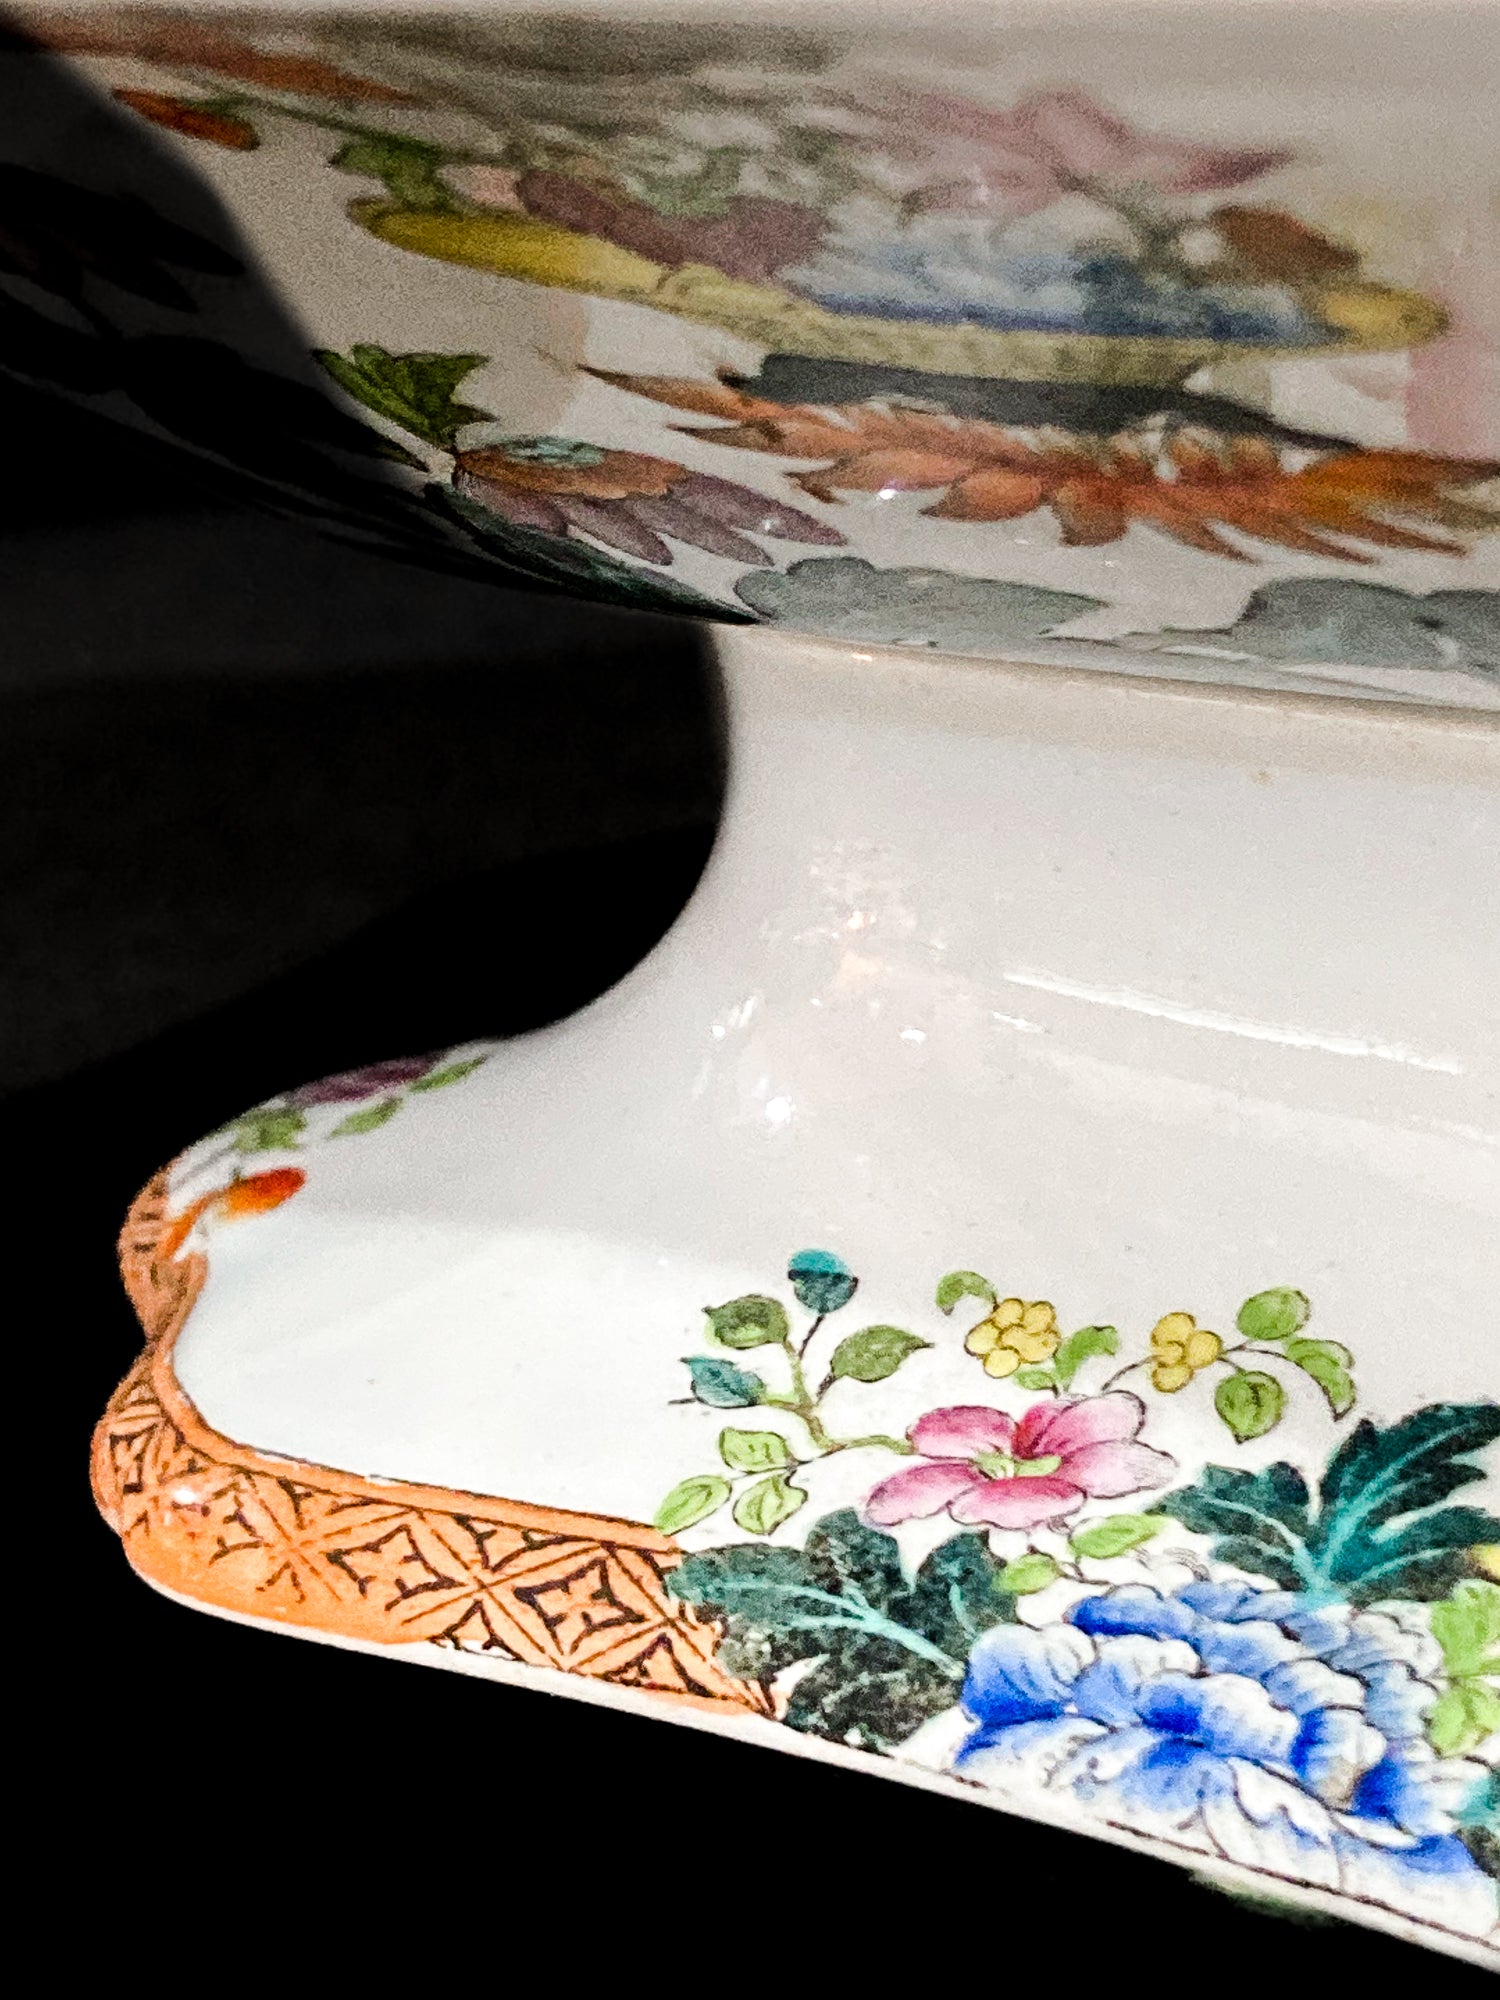 Antique 1850s Wedgwood Enameled Multicolor Floral Footed Compote Dish Close Up Base